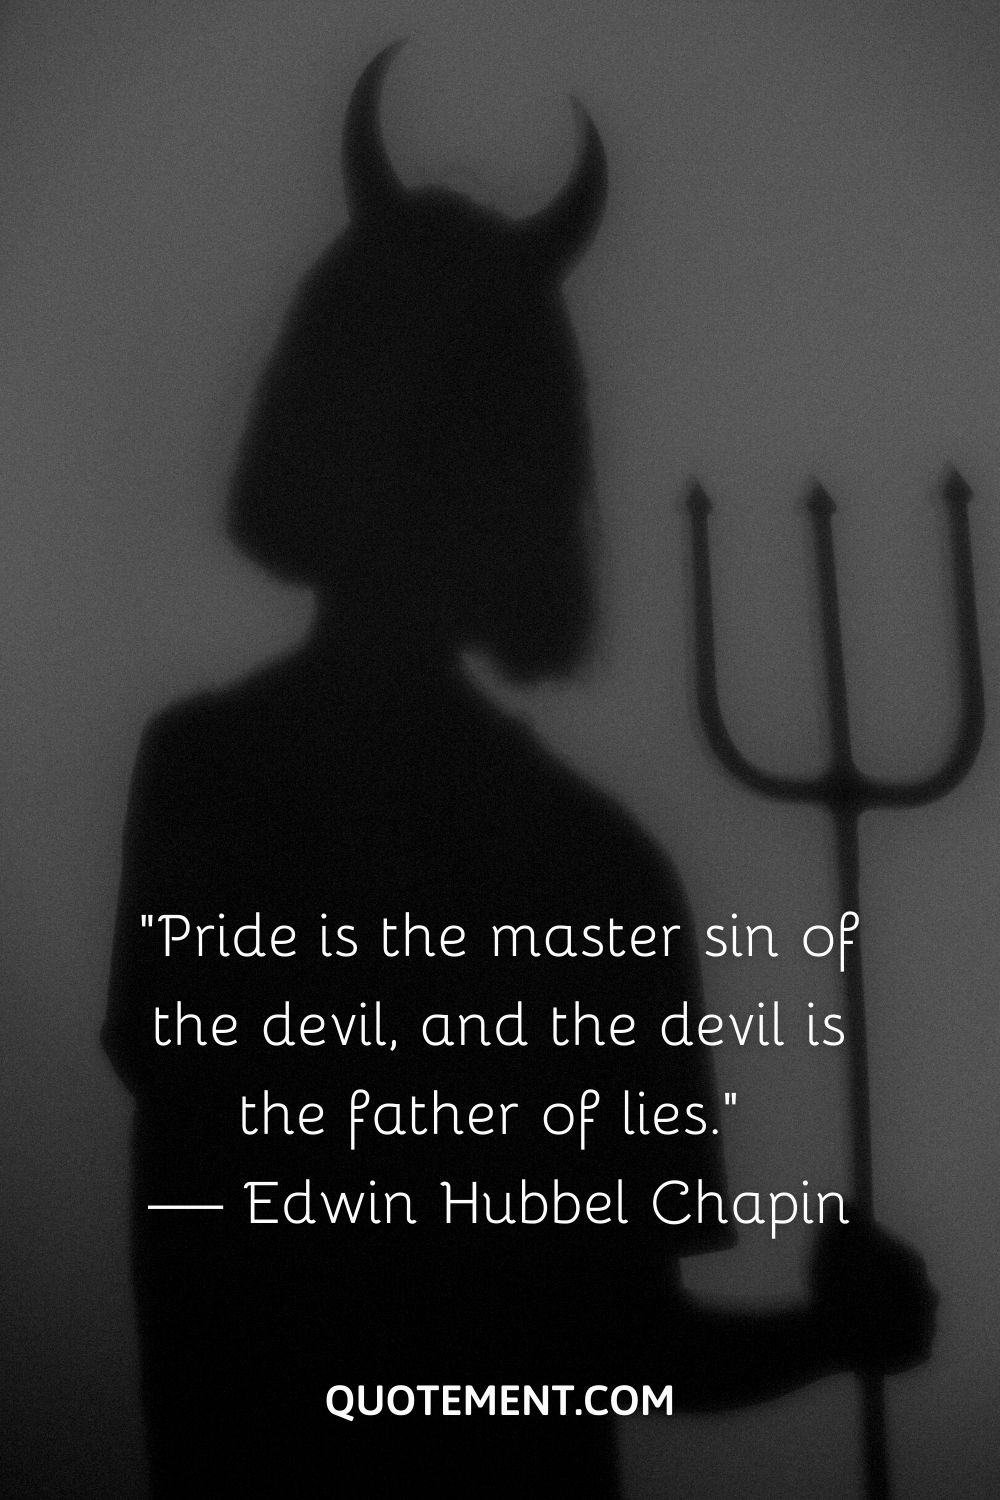 “Pride is the master sin of the devil, and the devil is the father of lies.” — Edwin Hubbel Chapin